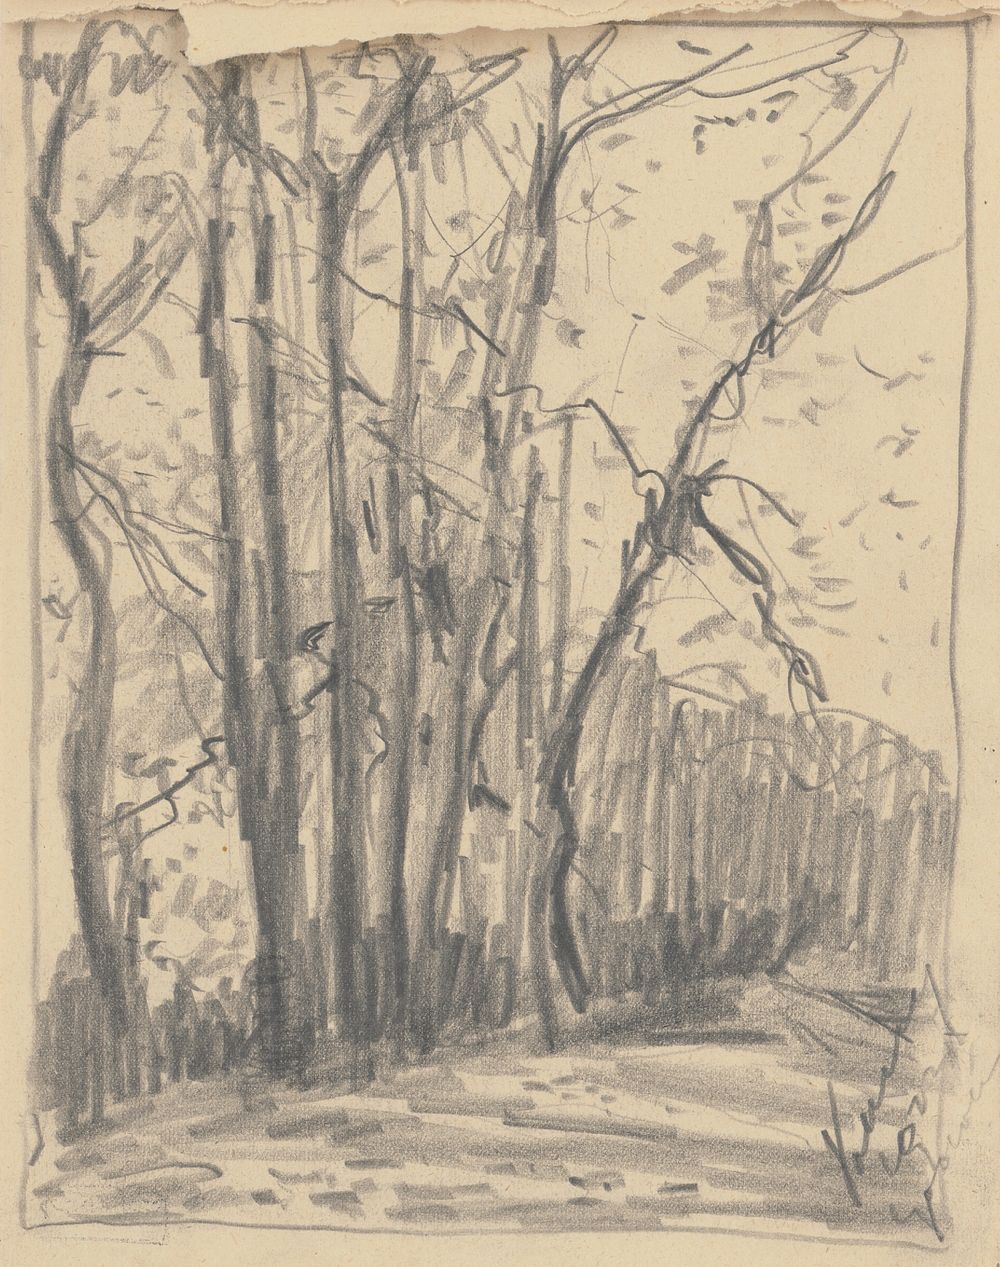 Study of trees by the road by Zolo Palugyay